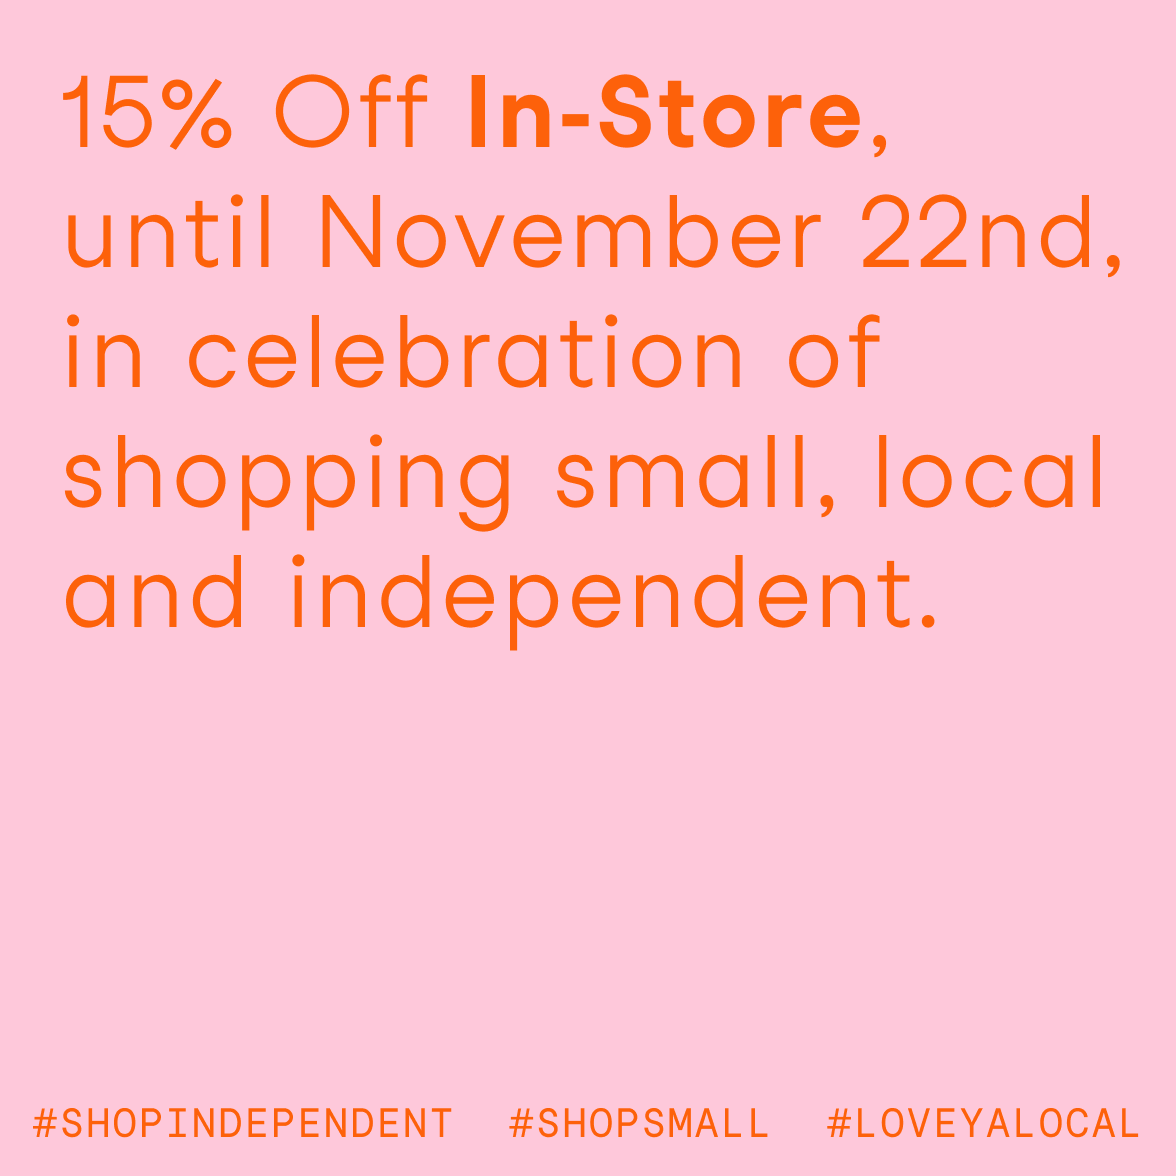 Shop small, shop local, shop independent, support the small guys - we’re here for you!!! Open daily, 15% off everything in store only for November 😊 #loveyalocal #shop small #shopindependent #supportthesmallguys